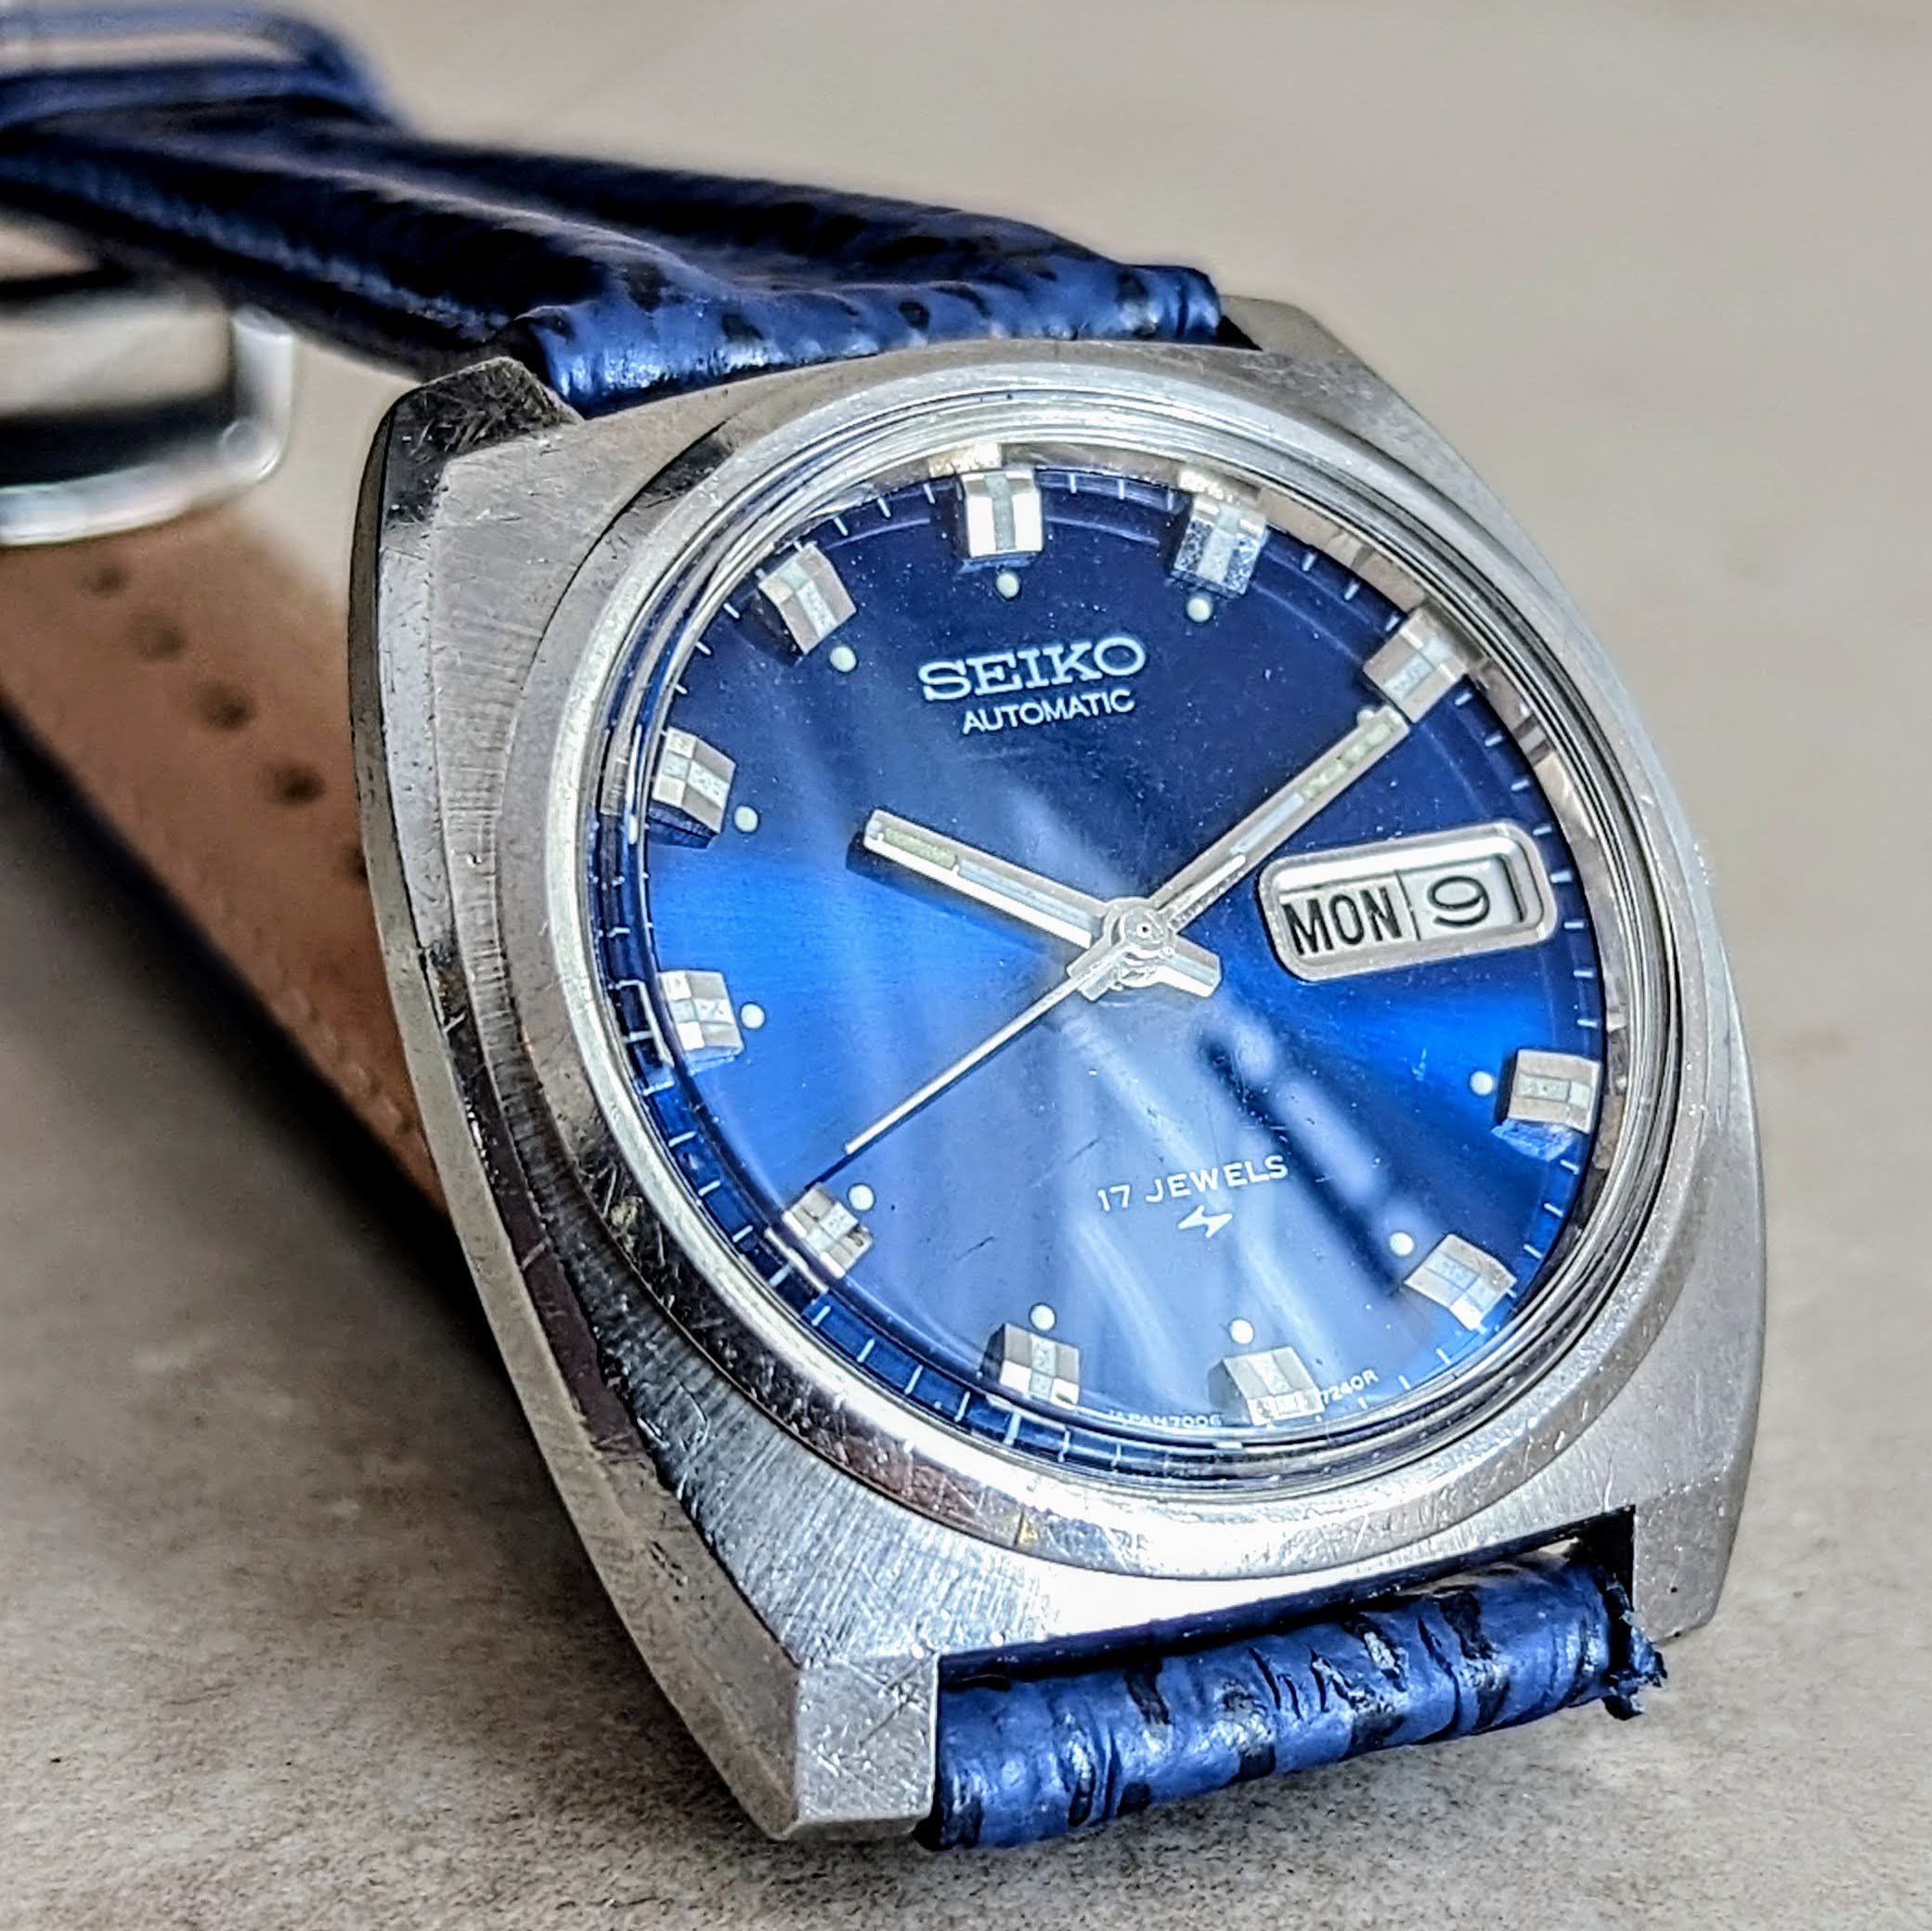 SEIKO Automatic Watch Day/Date Indicator Blue Dial Wristwatch – SECOND HAND  HOROLOGY